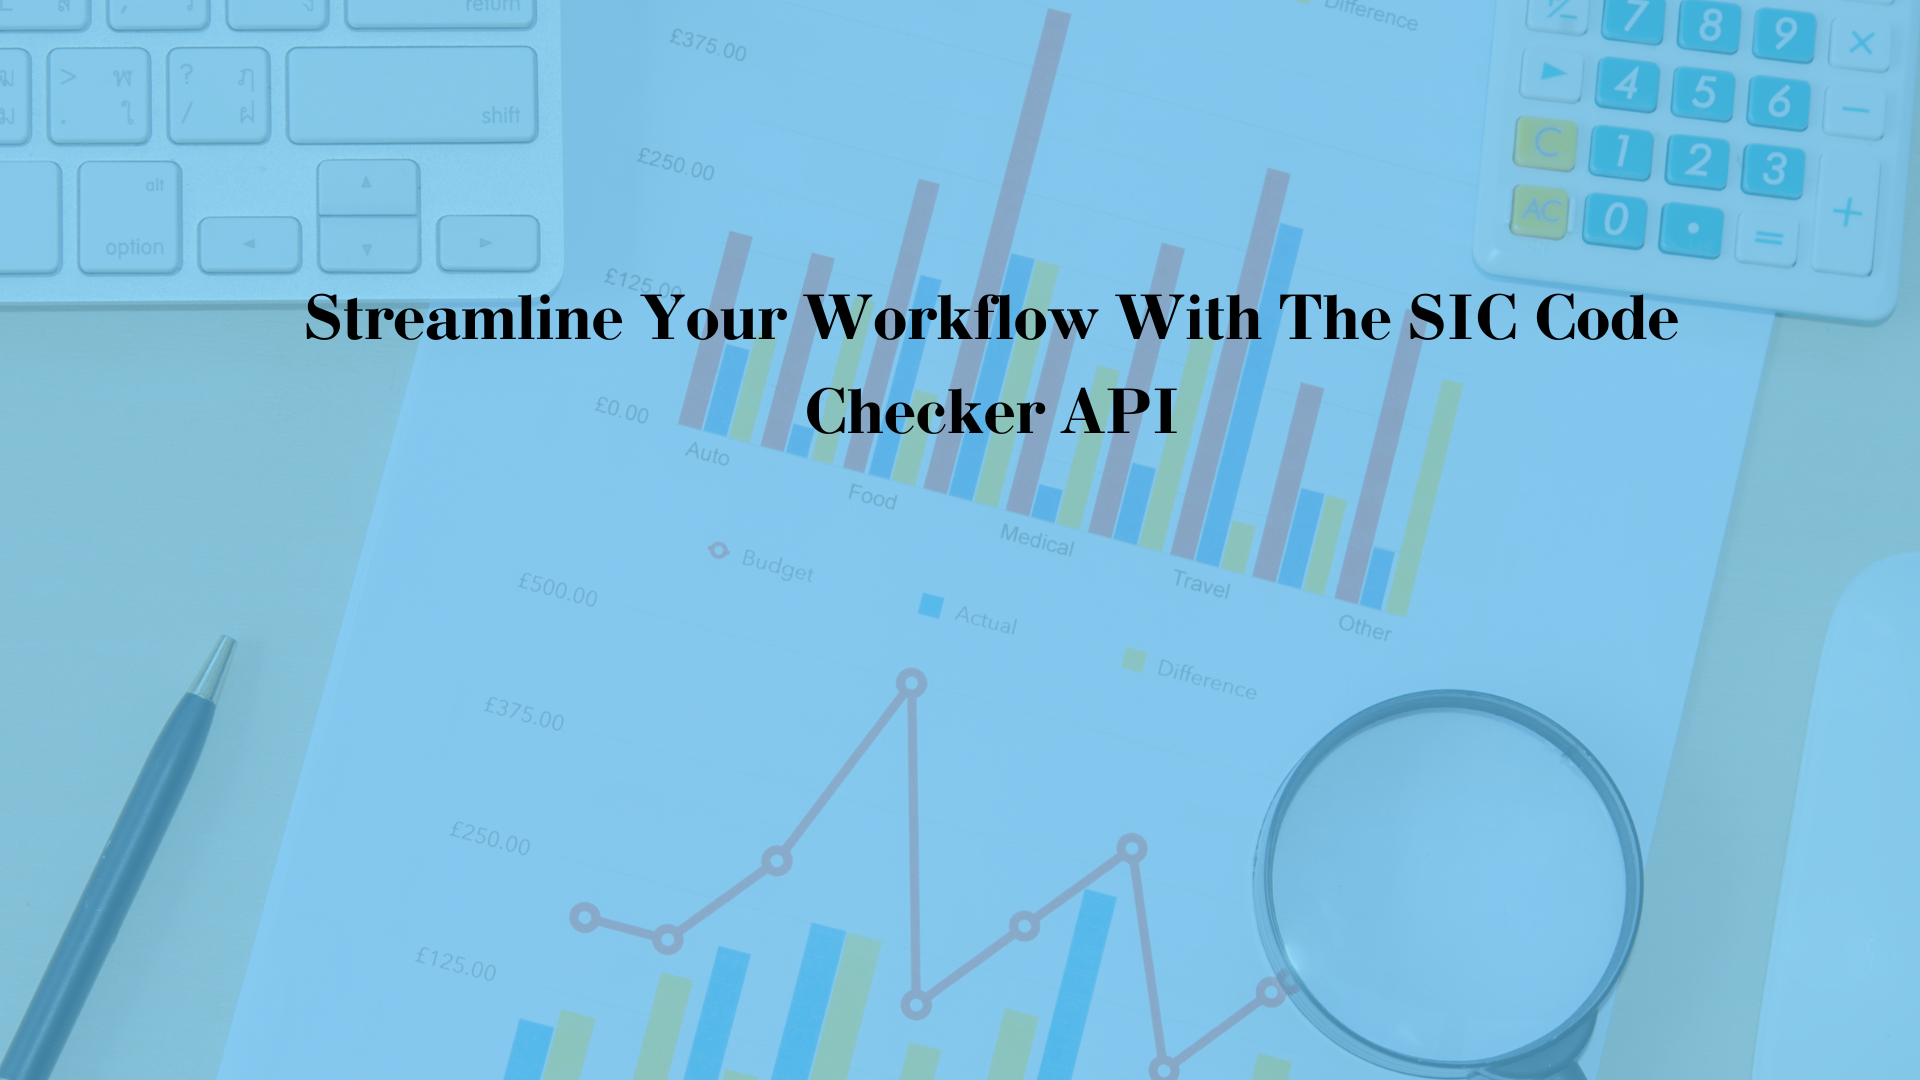 Streamline Your Workflow With The SIC Code Checker API